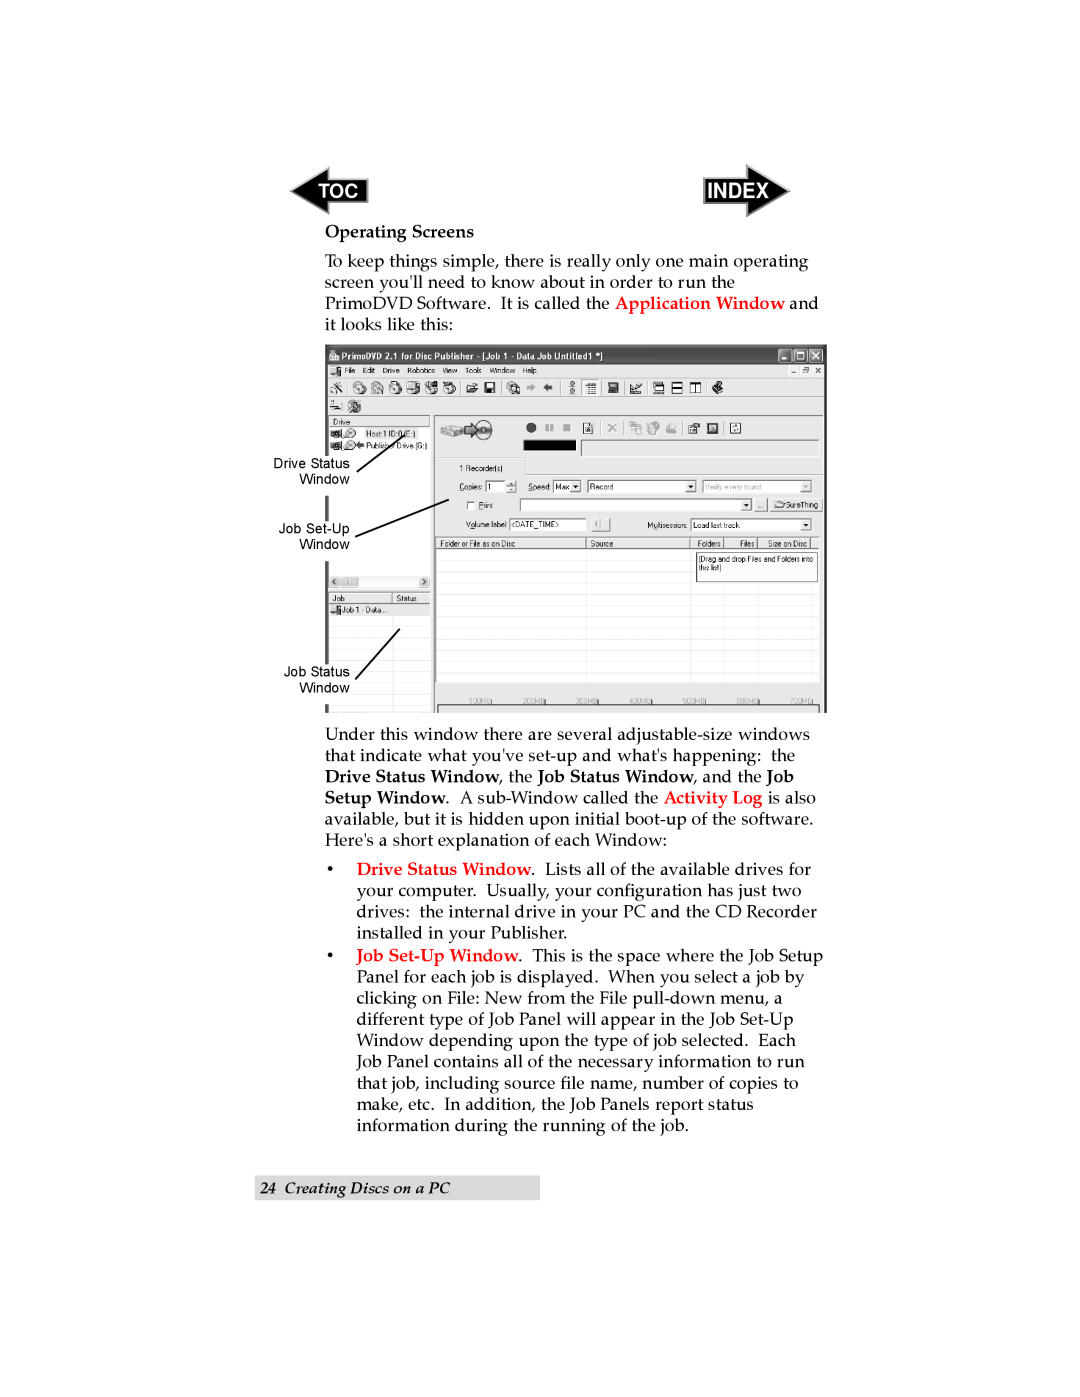 Primera Technology II user manual Index, Operating Screens, Creating Discs on a PC 